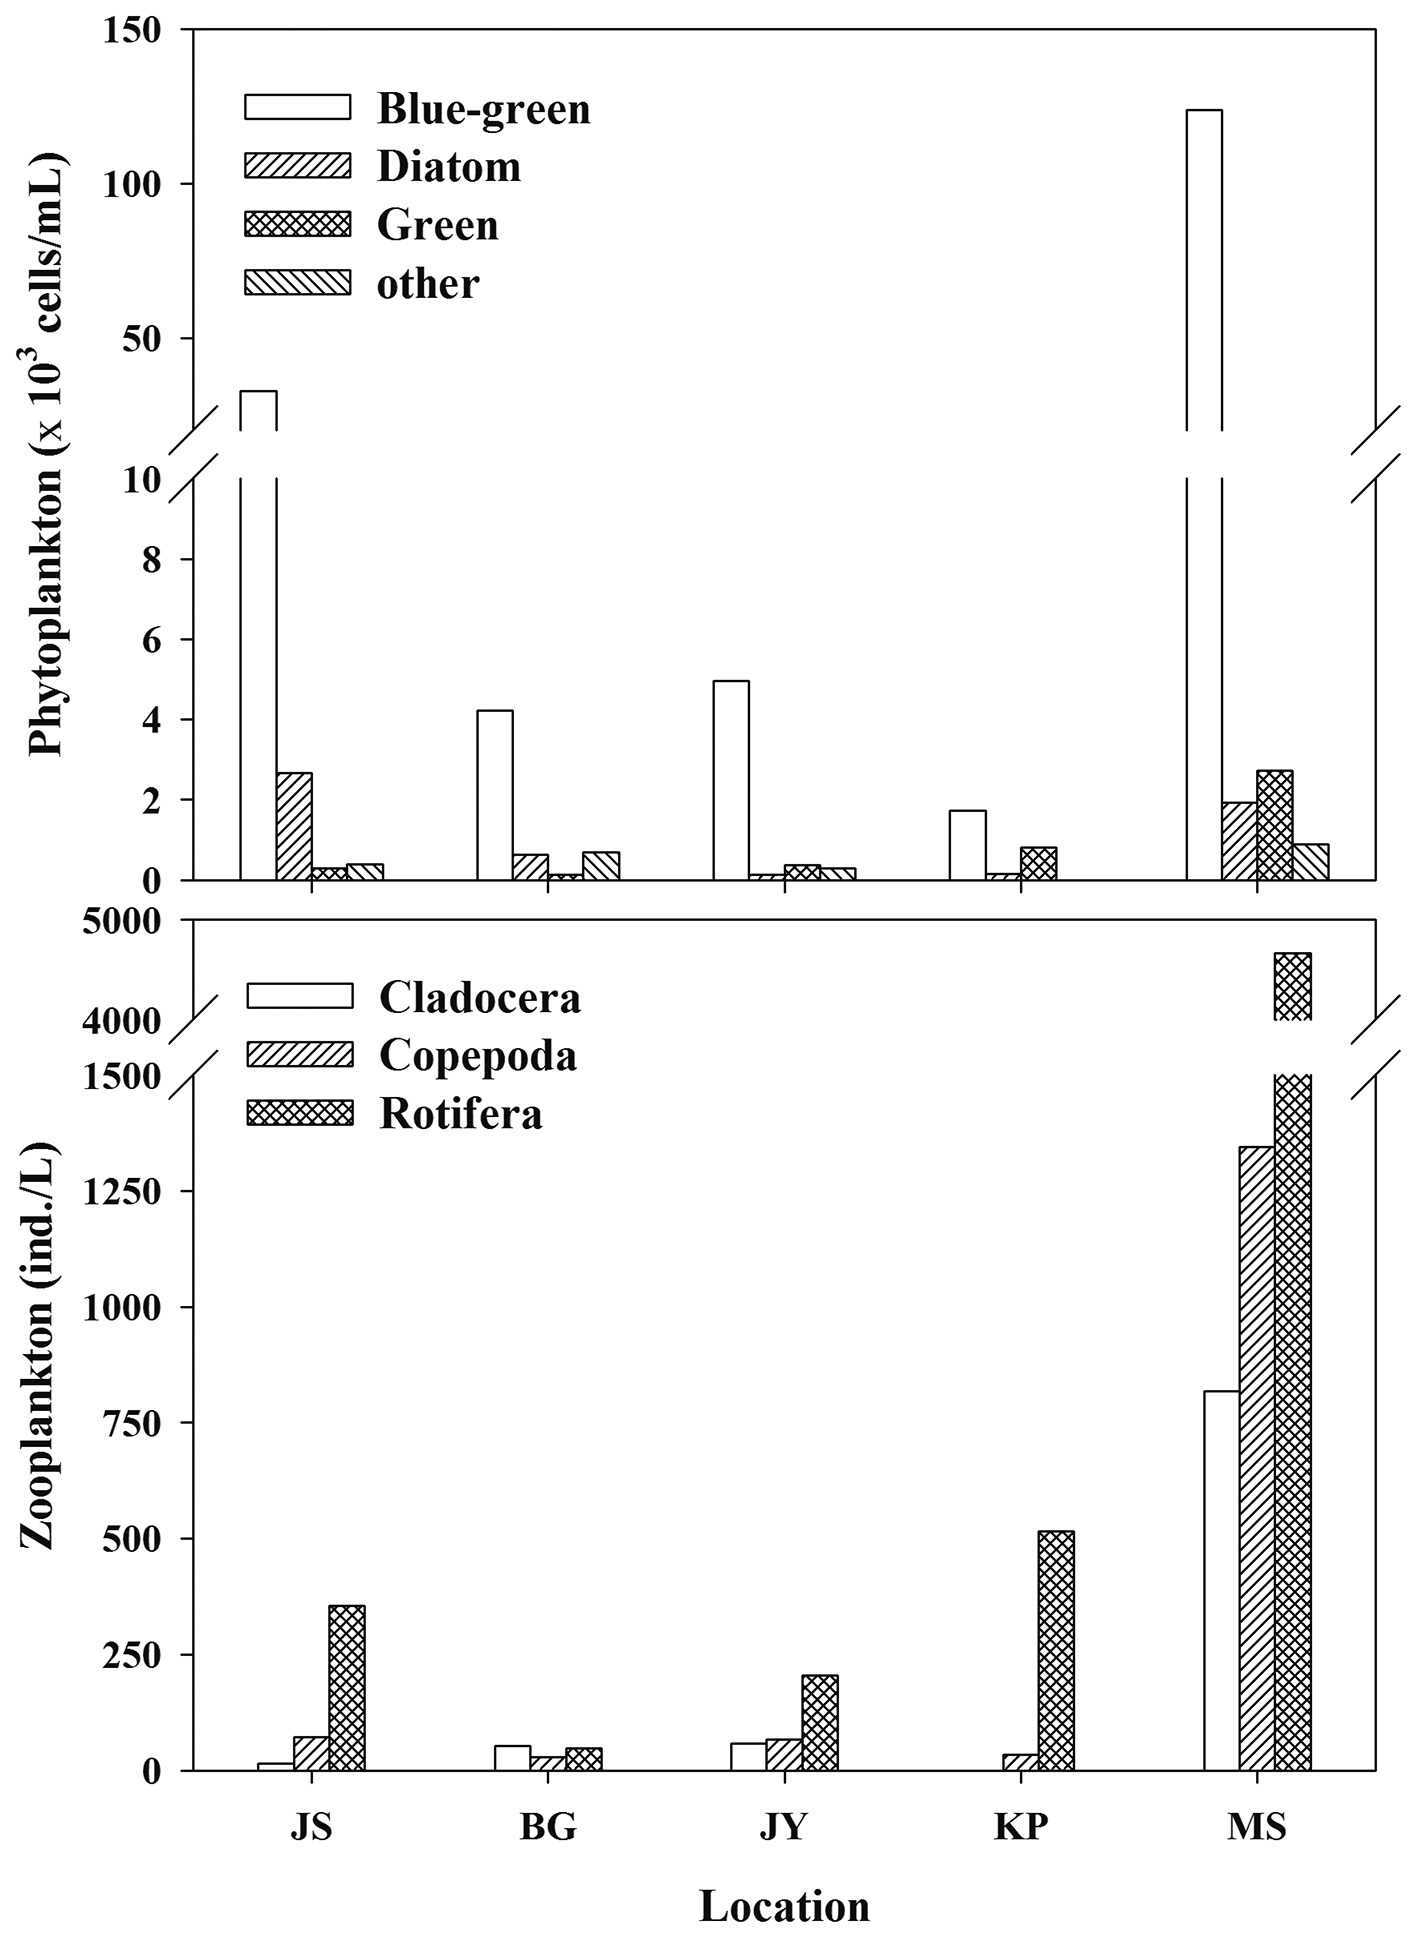 Phytoplankton and zooplankton populations in the study
reservoirs.